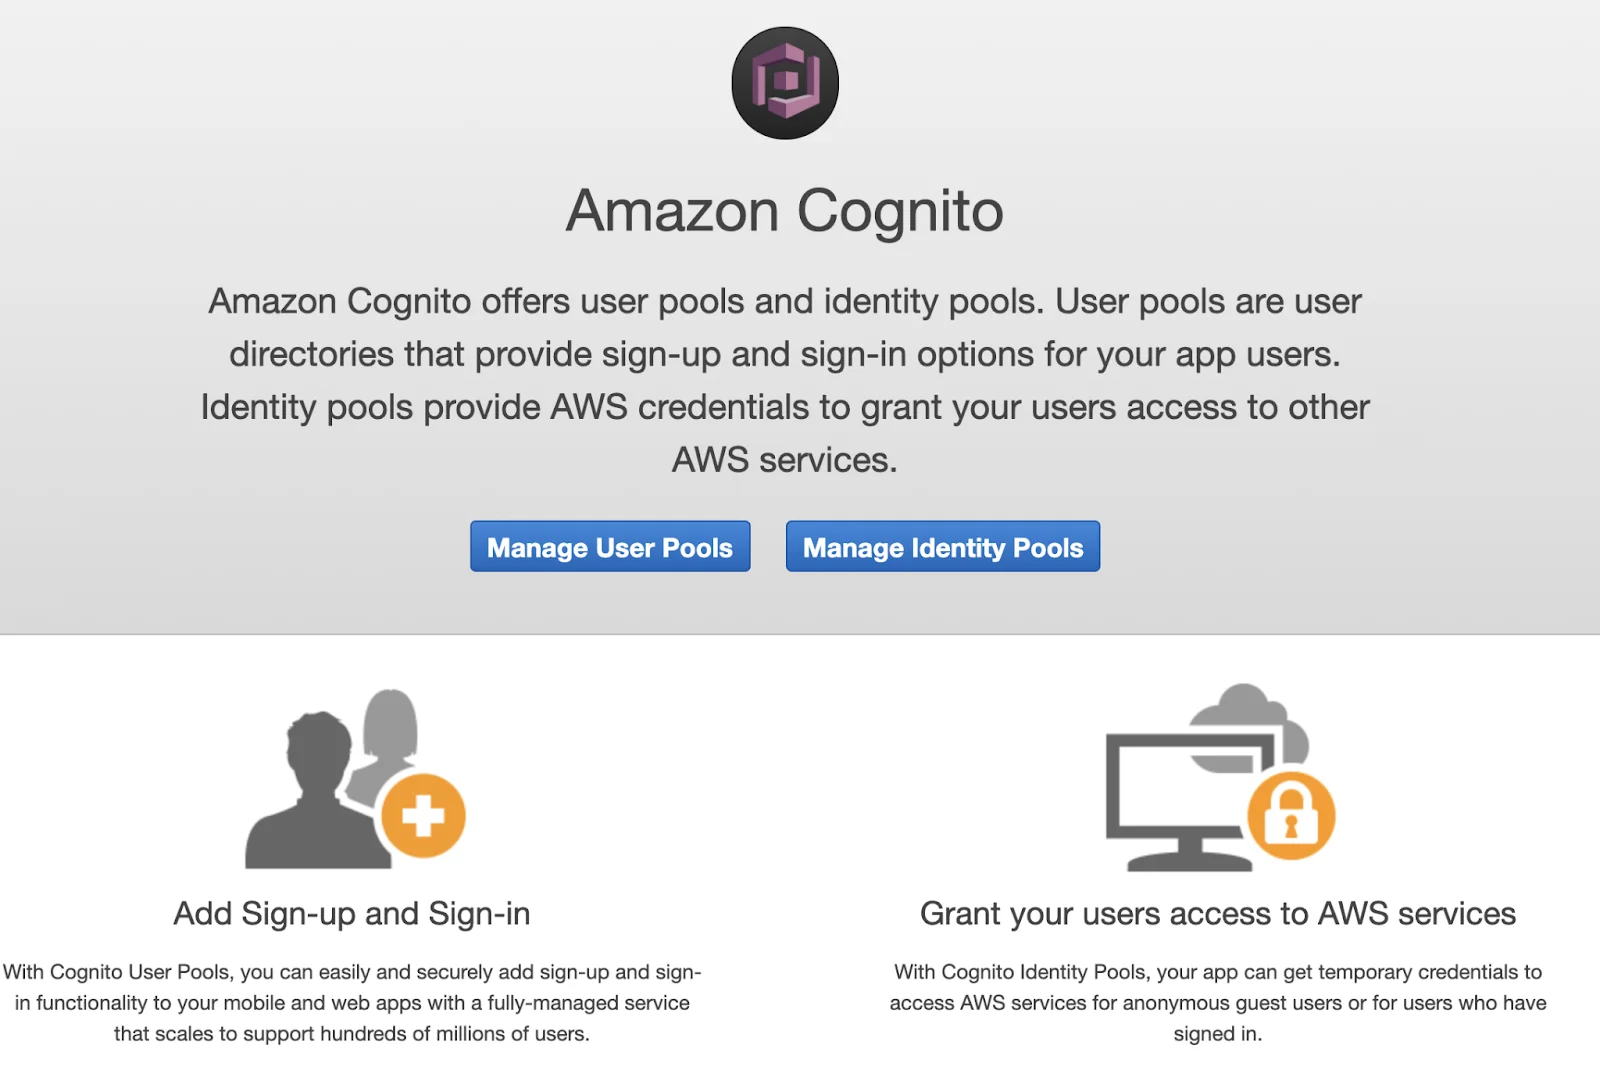 Learn with Sphere: How to Build SSO solution on top of Amazon Cognito